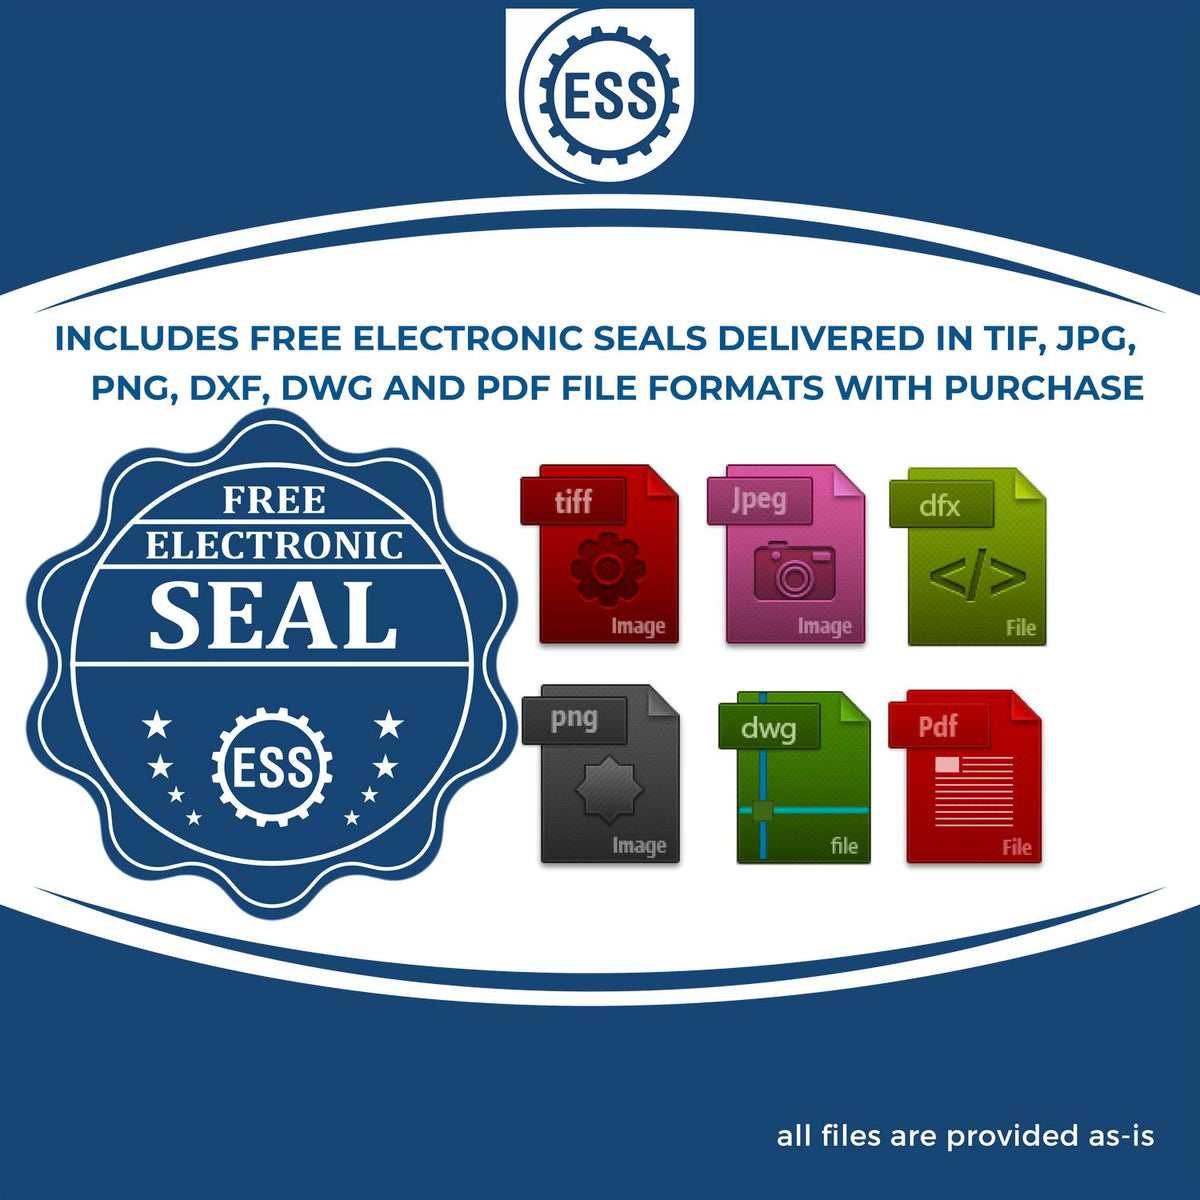 An infographic for the free electronic seal for the Slim Pre-Inked North Dakota Architect Seal Stamp illustrating the different file type icons such as DXF, DWG, TIF, JPG and PNG.